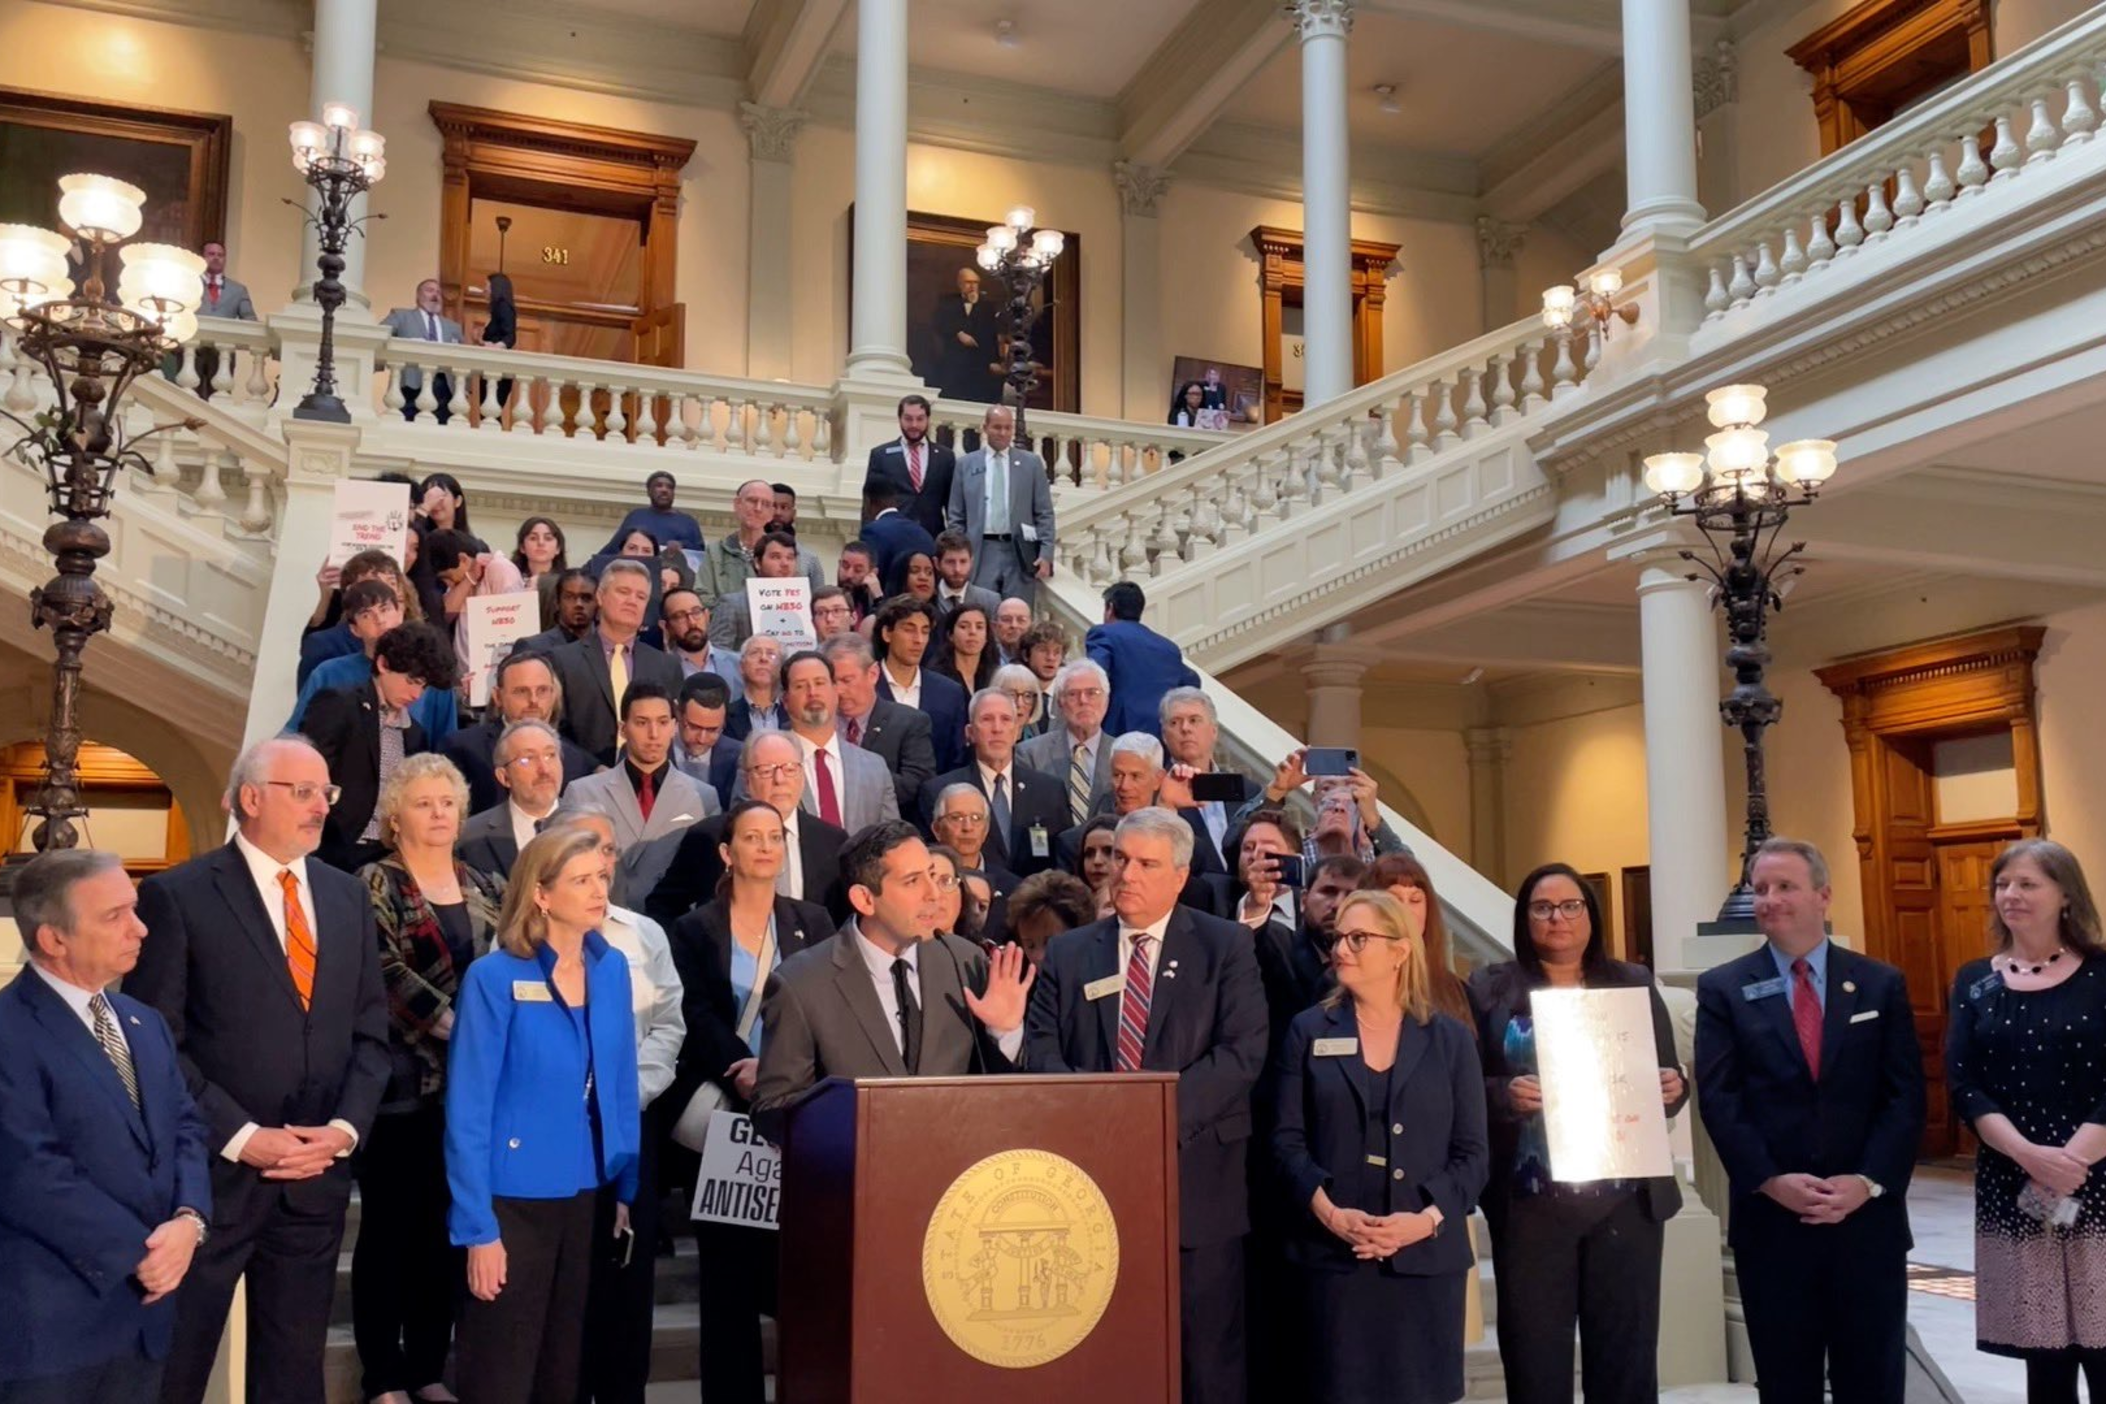 Rep. John Carson (to right of podium) gathers with members of the Georgia legislature inside the capitol on February 22, 2023 to support House Bill 30, known as the 'Antisemitism Bill.'